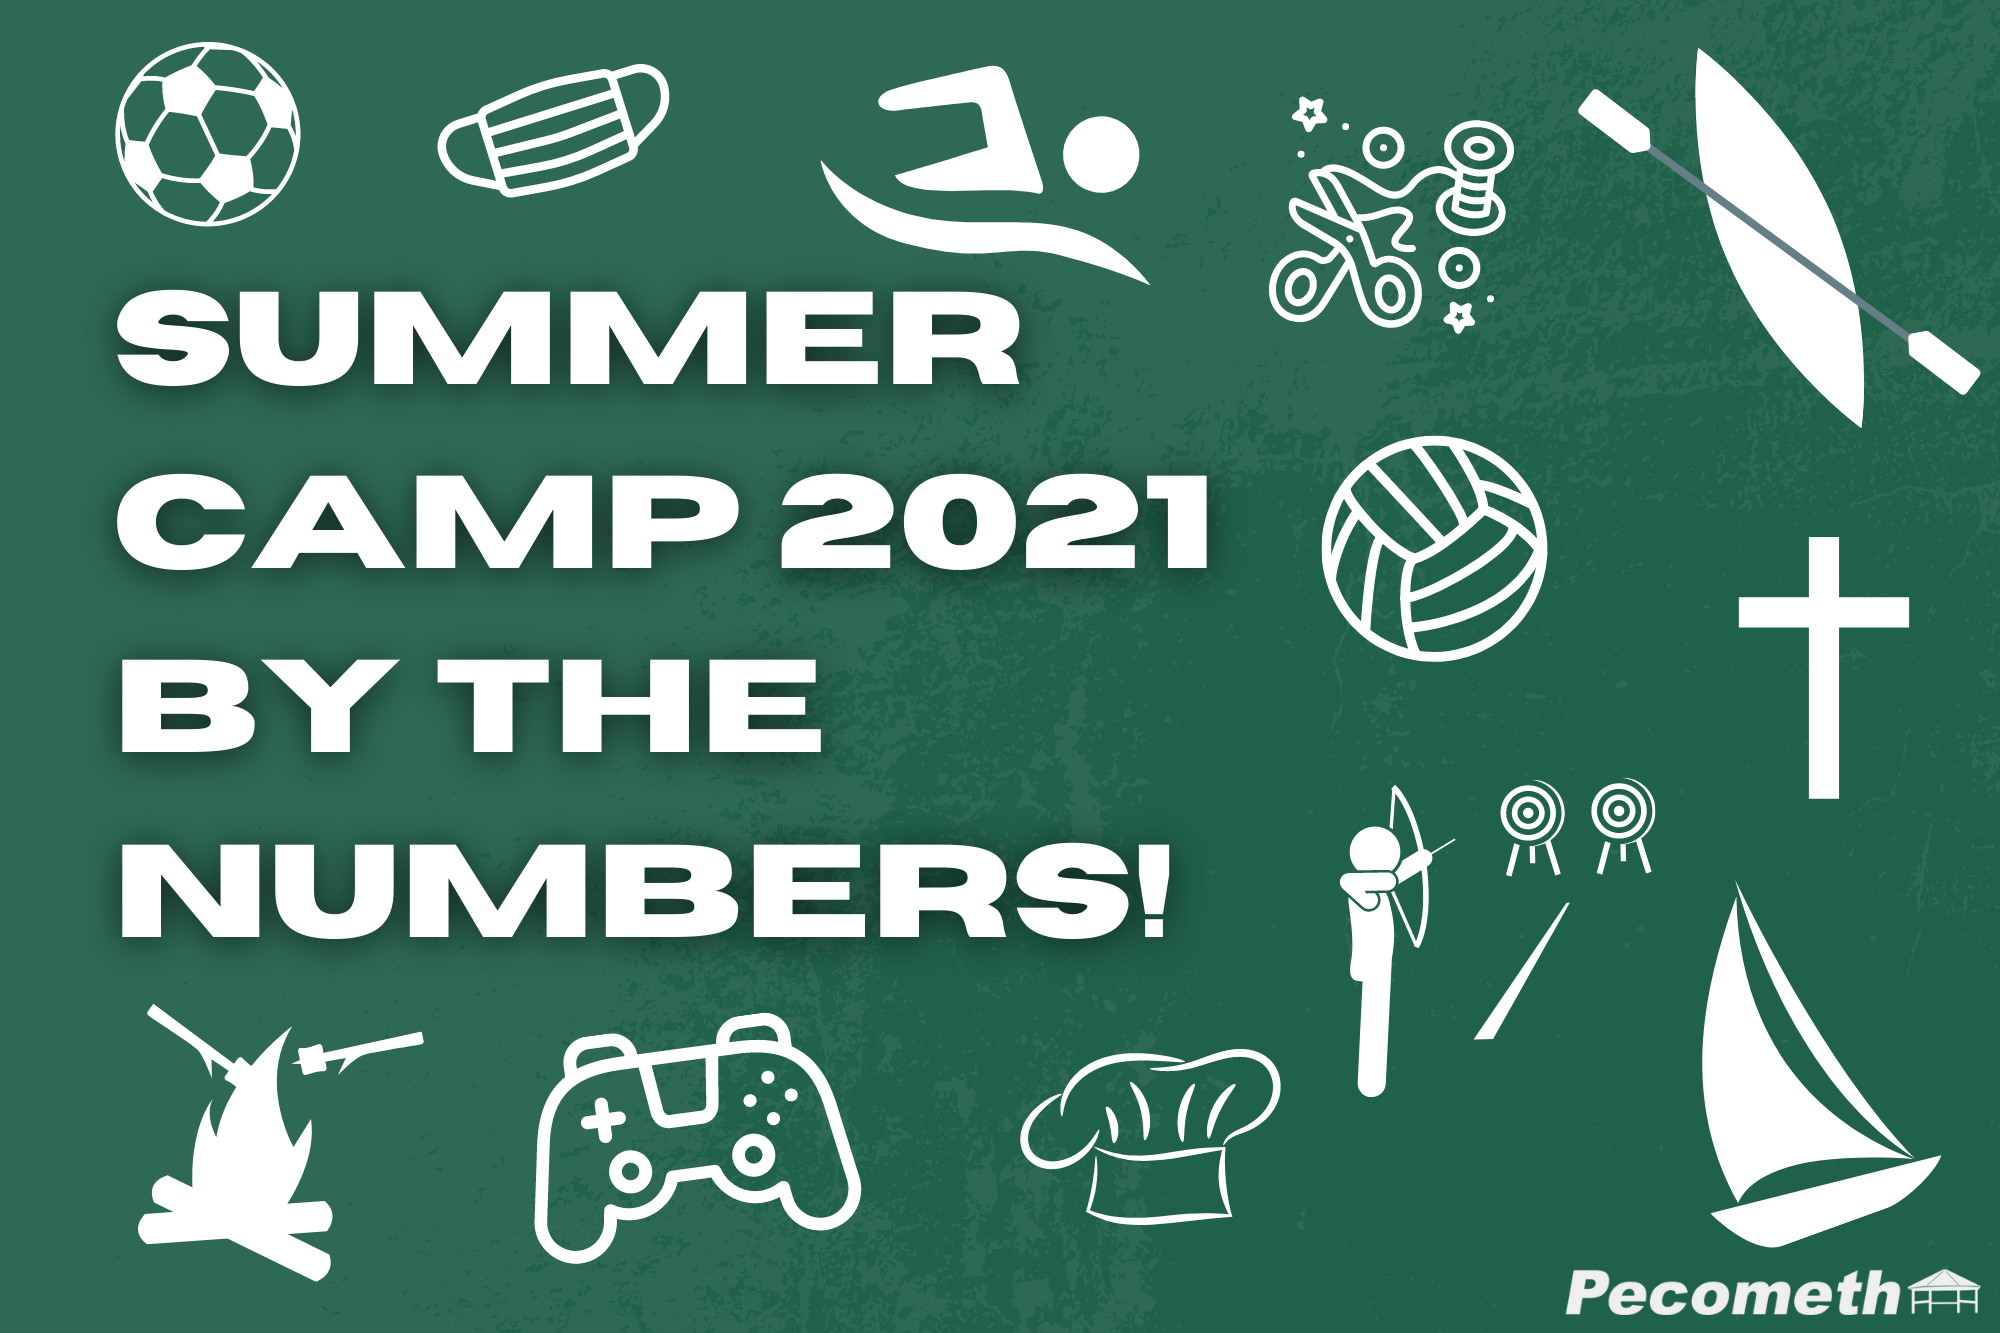 Summer Camp 2021 by the Numbers!